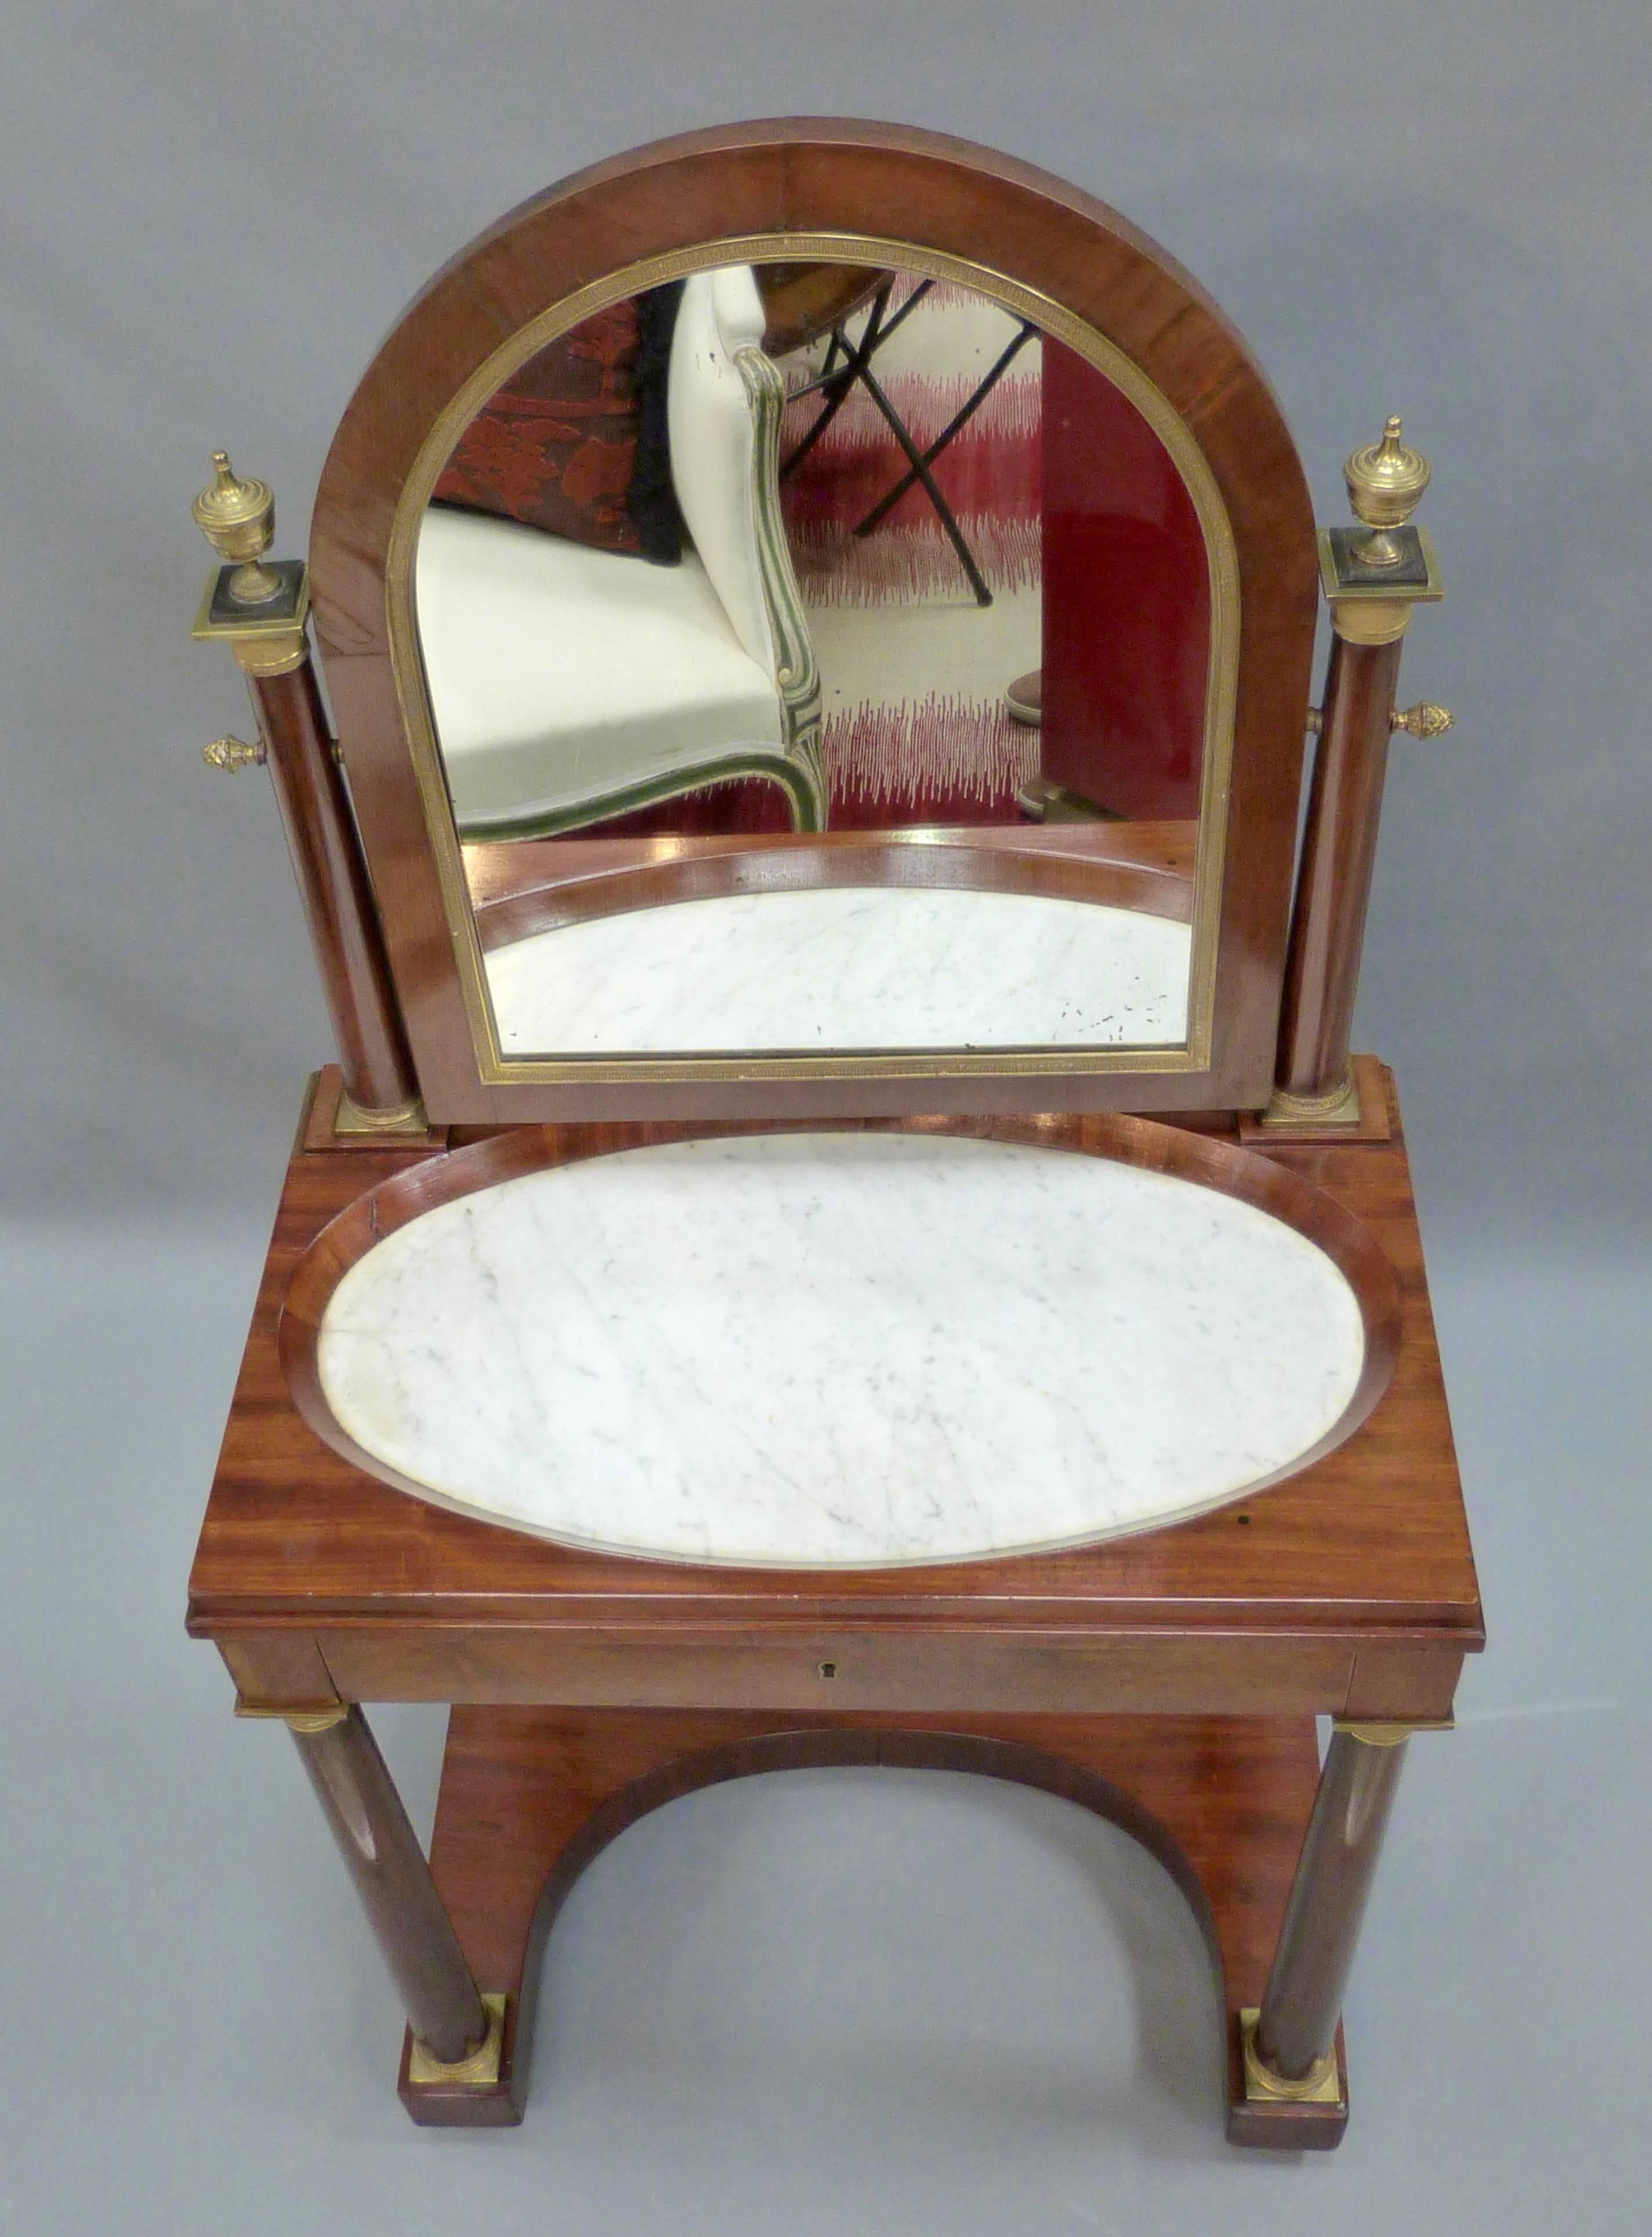 Empire Revival French Empire Style Dressing Table For Sale